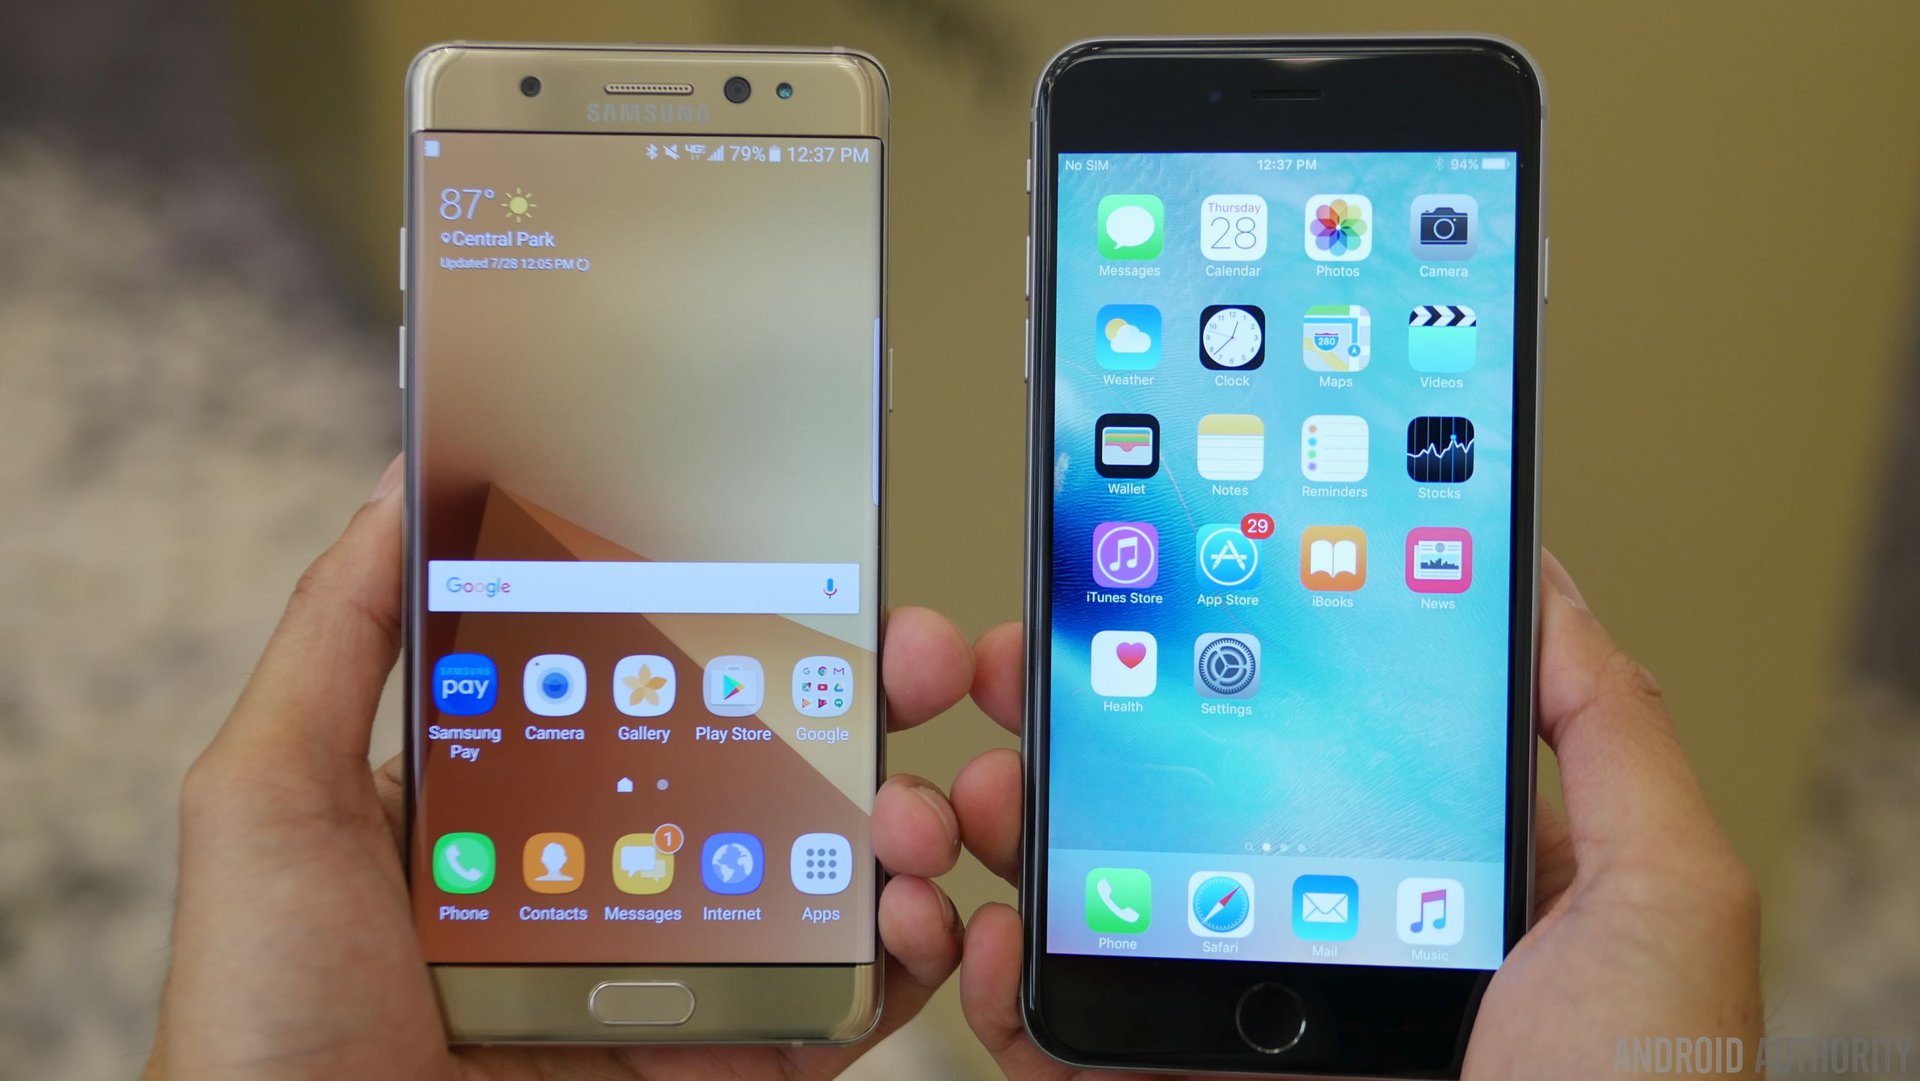 Samsung Galaxy Note 7 vs Apple iPhone 6s Plus first look 13